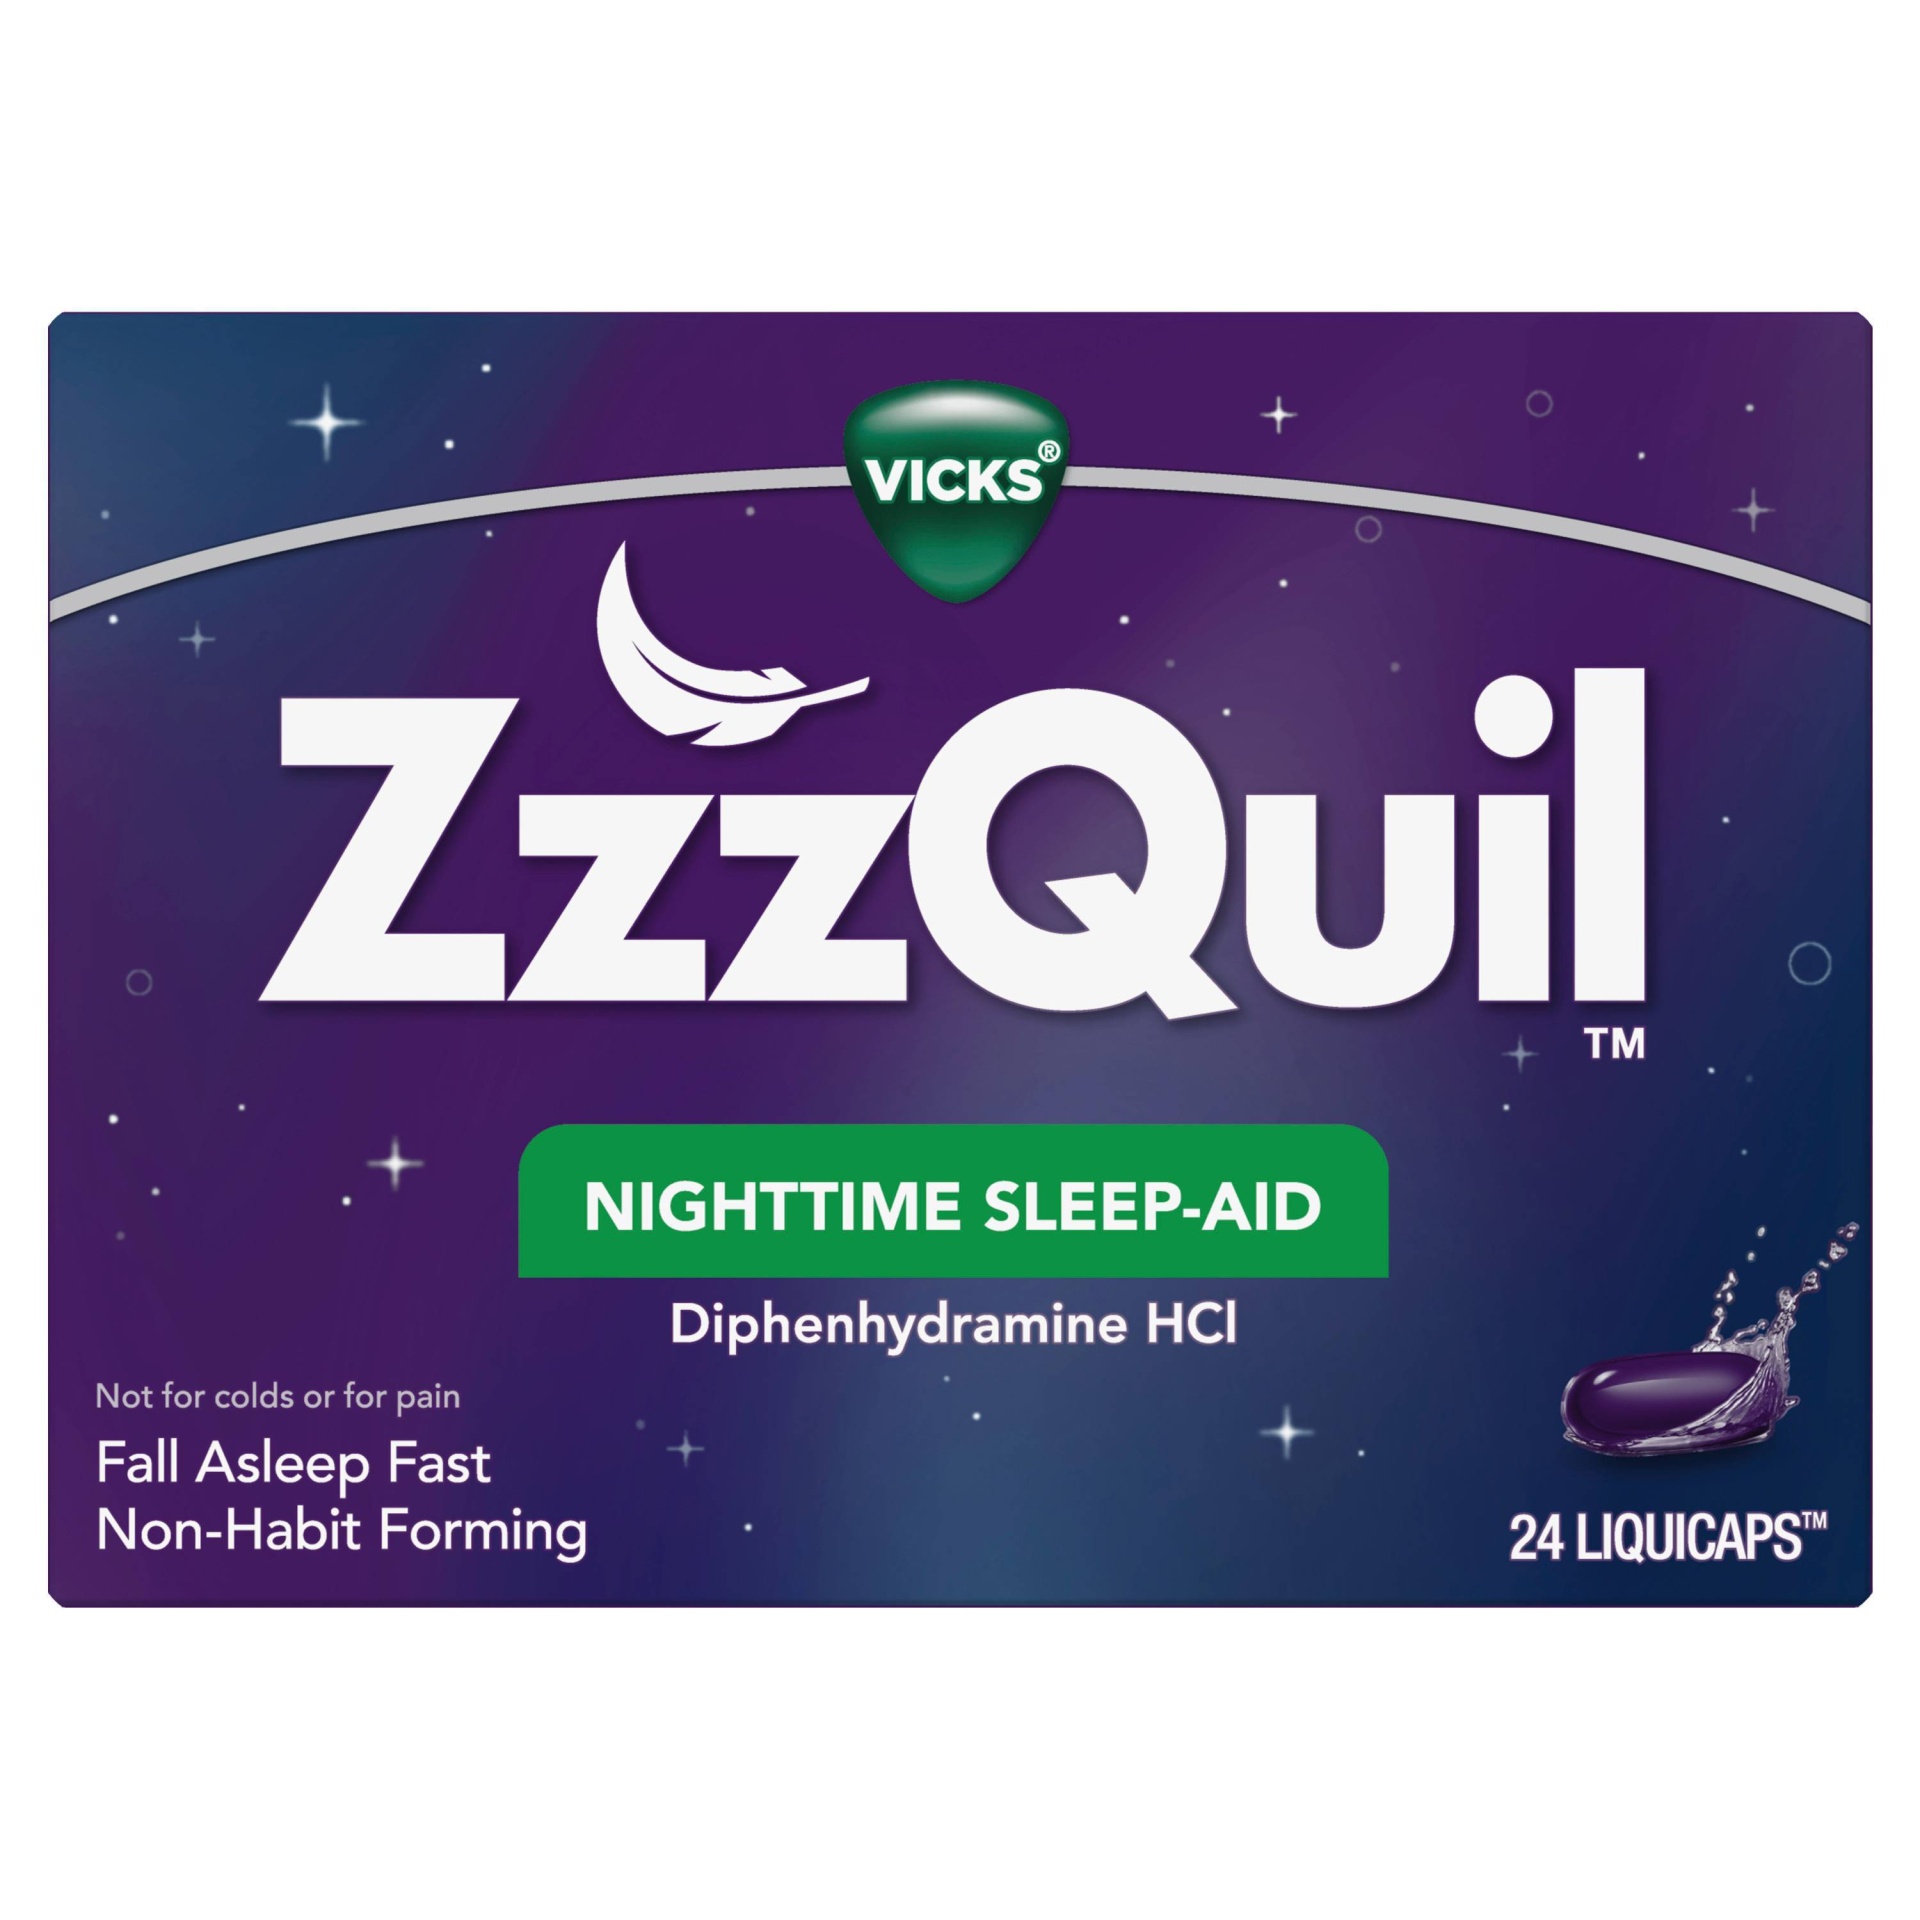 slide 1 of 2, ZzzQuil Nighttime Sleep-Aid LiquiCaps - Diphenhydramine HCl, 24 ct